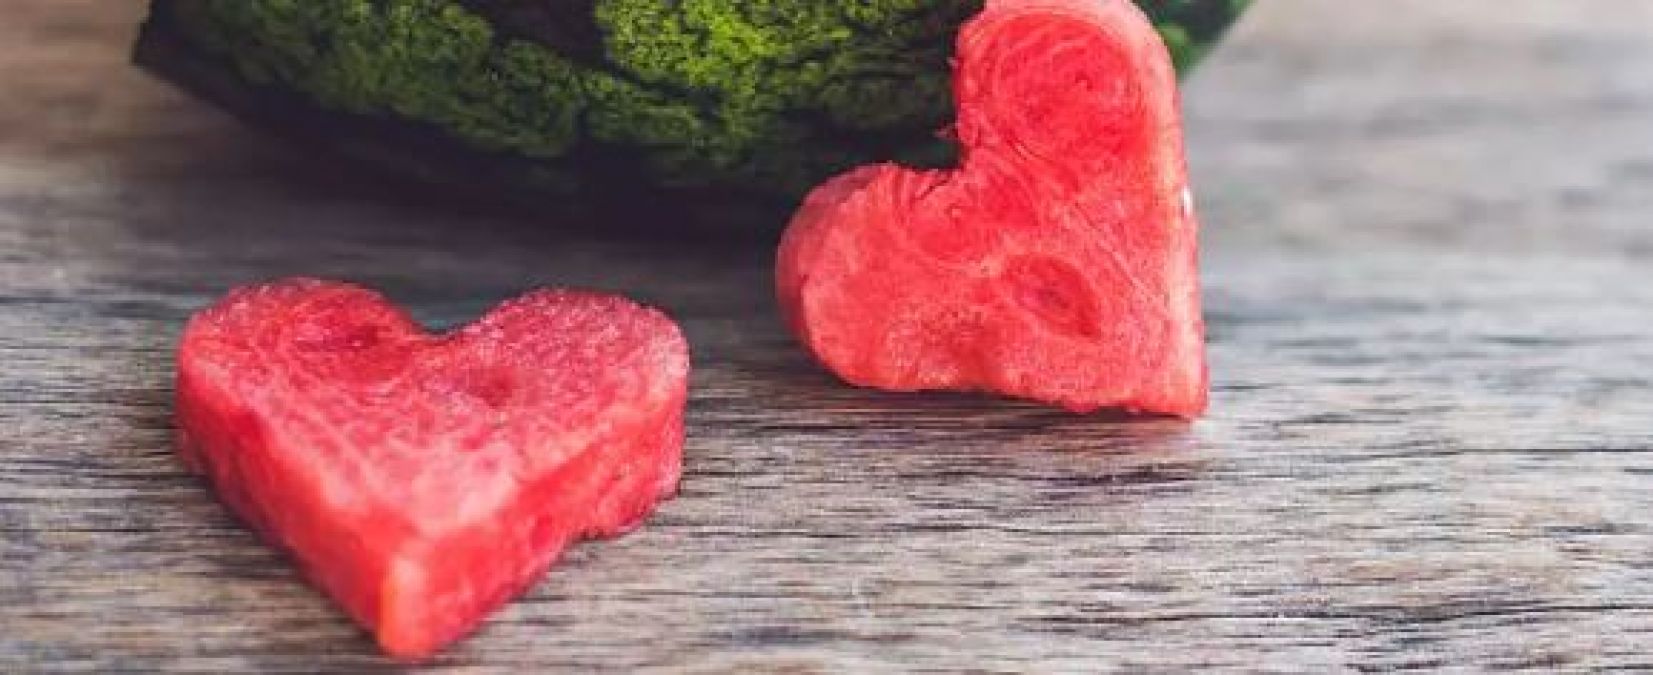 Hands and feet do not swell by eating watermelon in pregnancy, know more big benefits